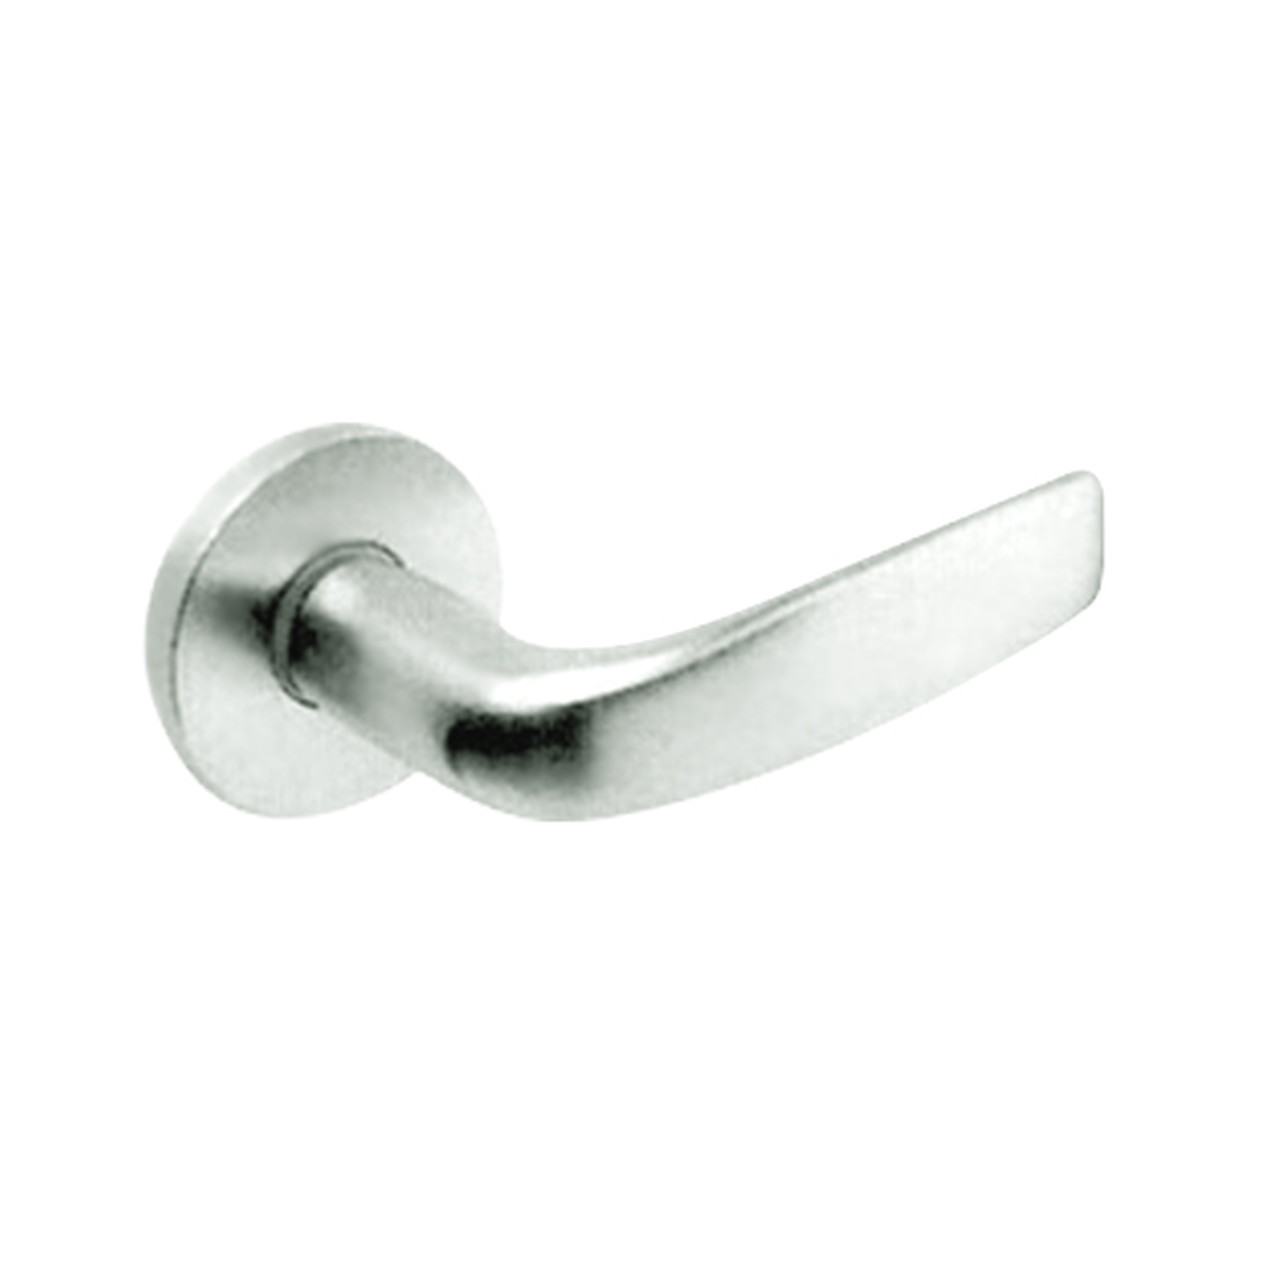 ML2032-CSF-618-M31 Corbin Russwin ML2000 Series Mortise Institution Trim Pack with Citation Lever in Bright Nickel